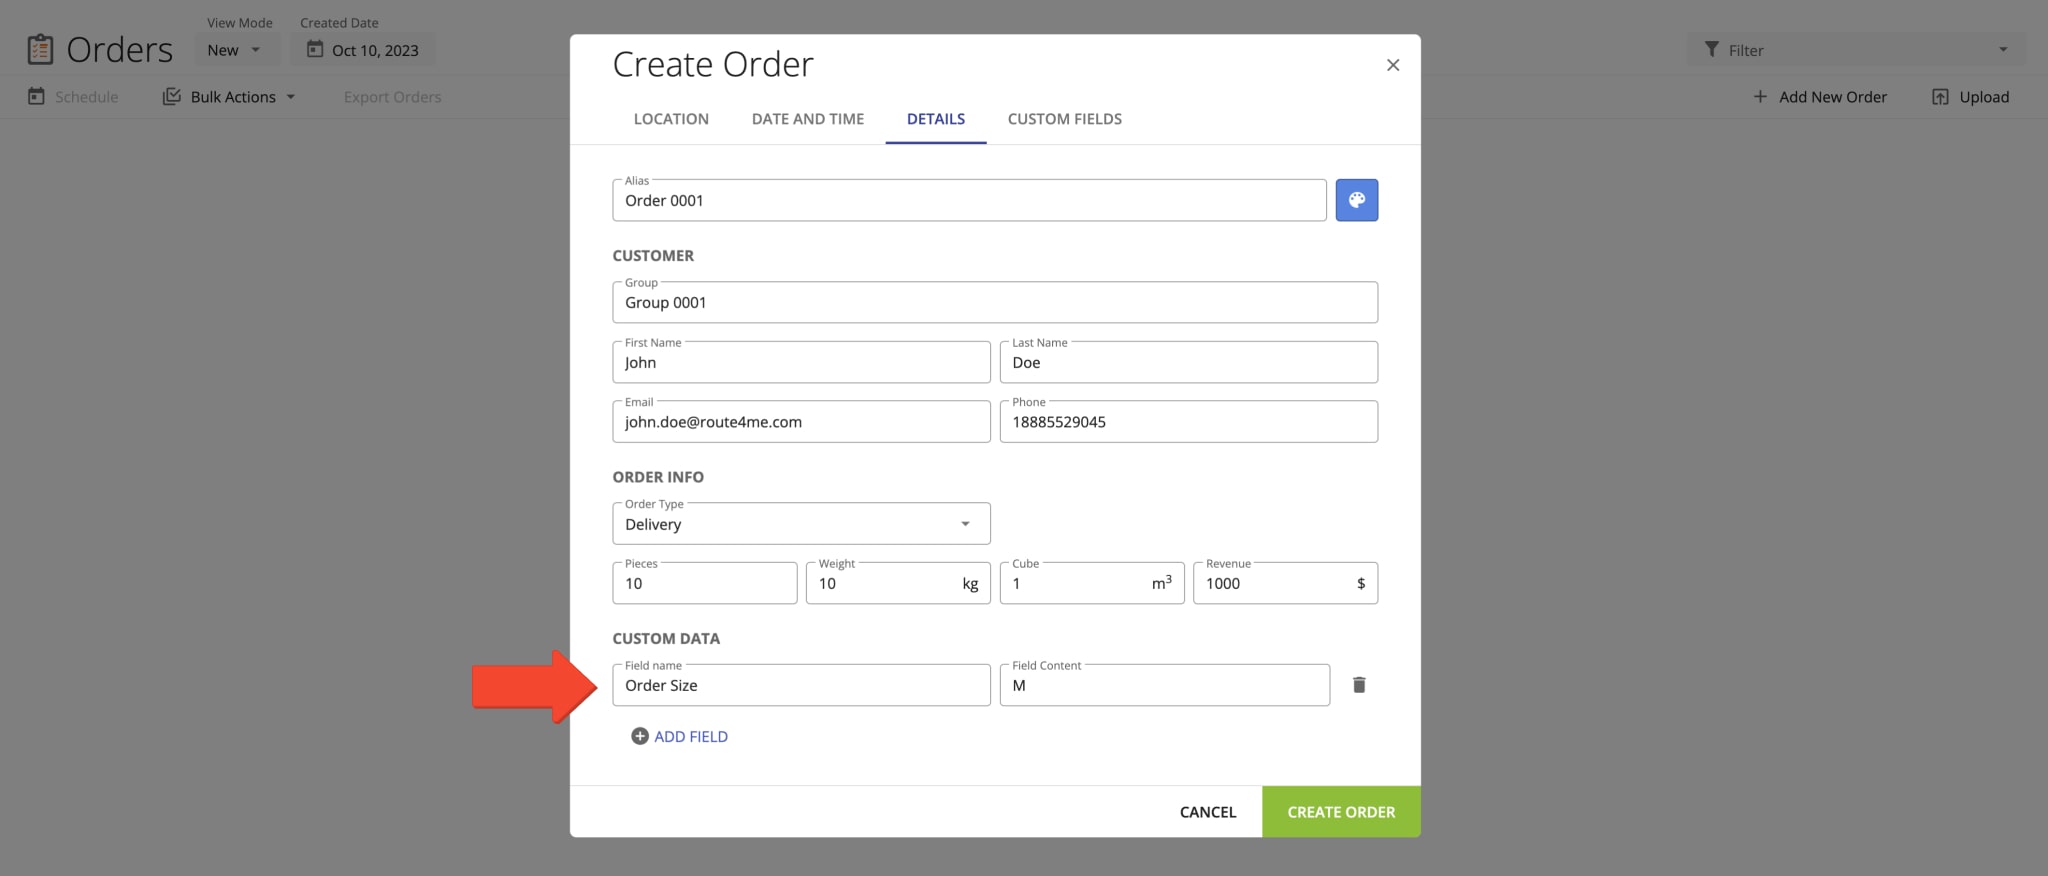 Adding Custom Data to assign custom order attributes and parameters to orders in Route4Me's Delivery Management System.